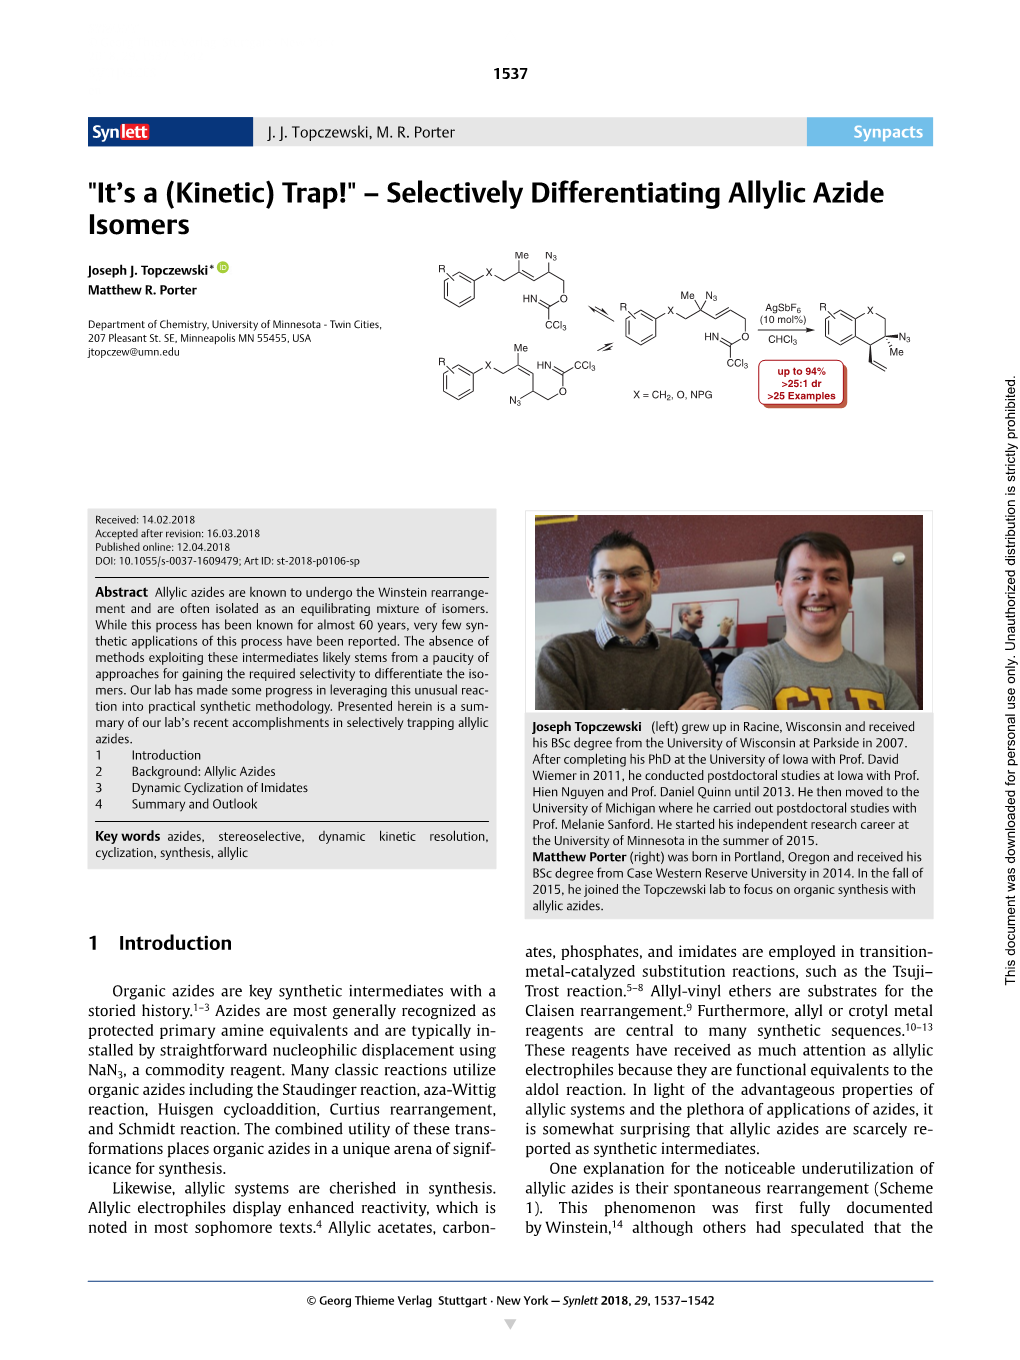 "It's a (Kinetic) Trap!" – Selectively Differentiating Allylic Azide Isomers